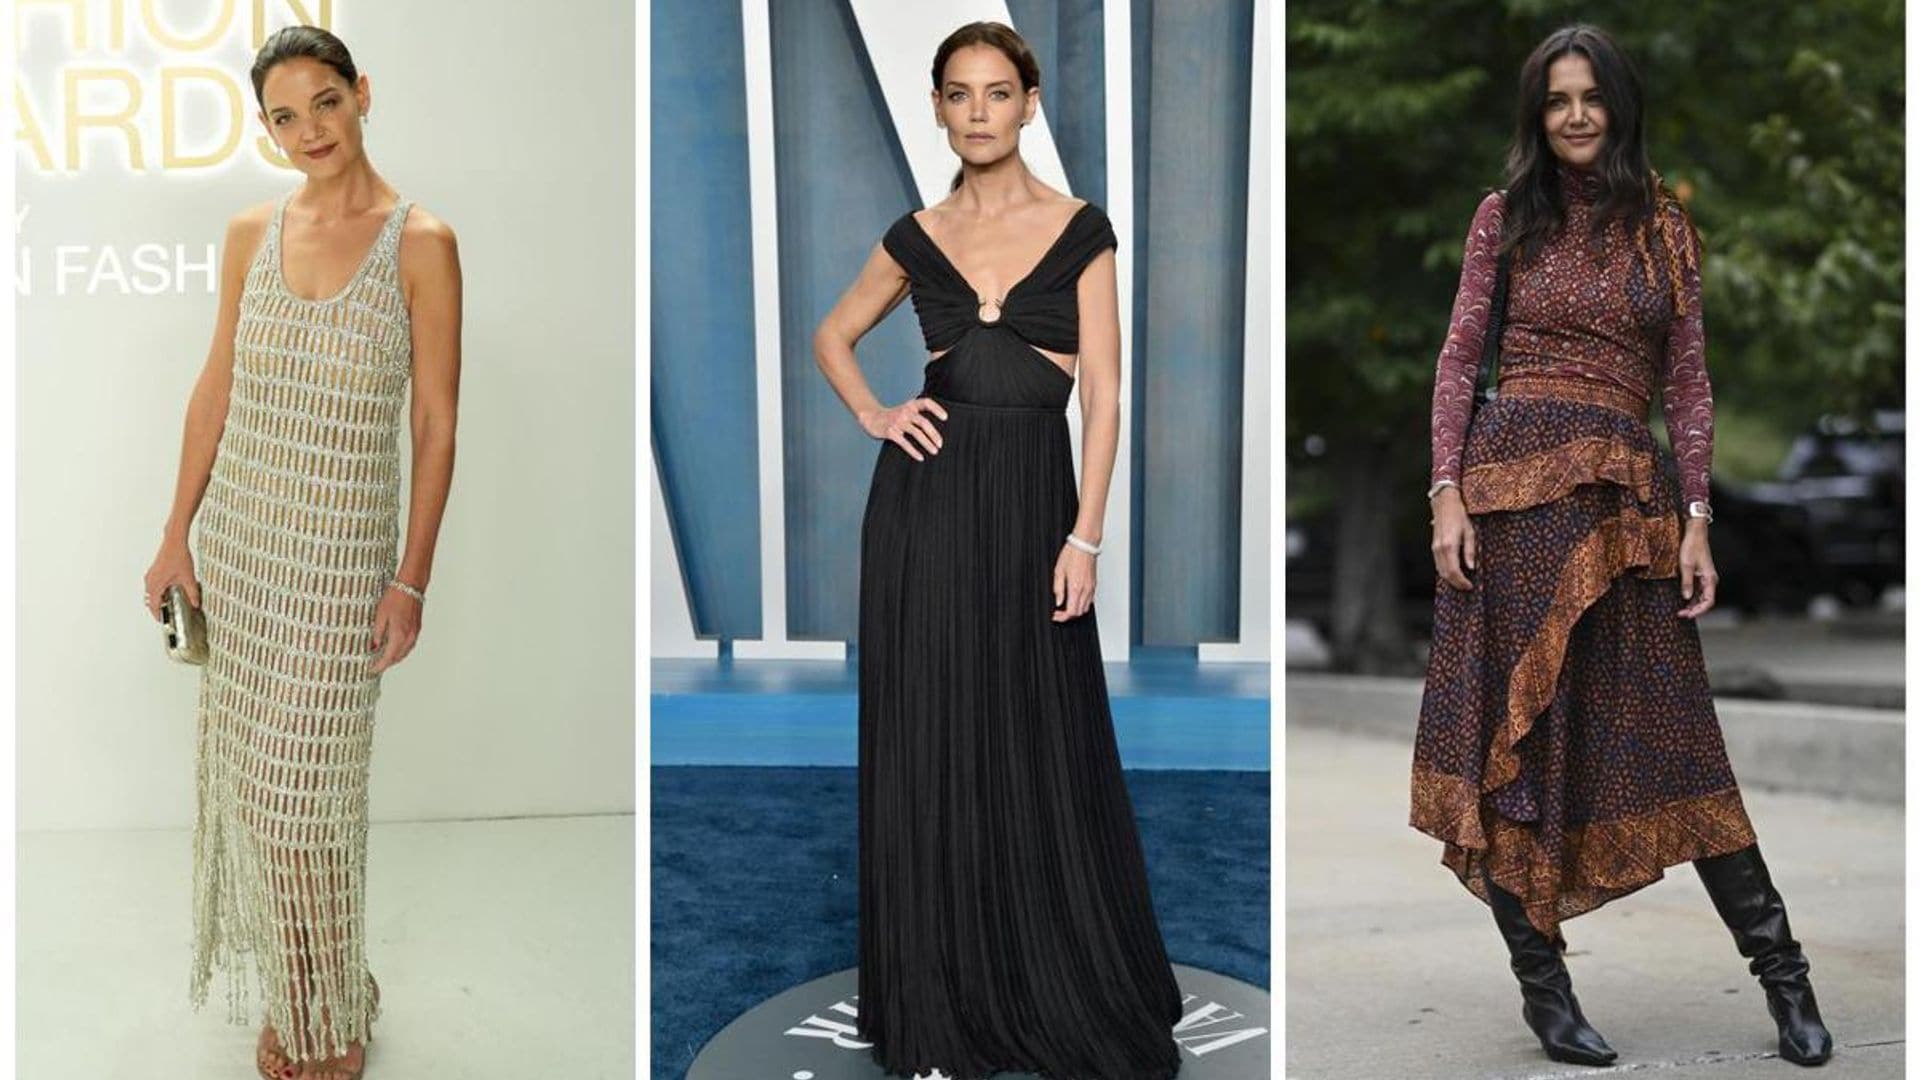 Katie Holmes’ 10 top fashion moments of 2022